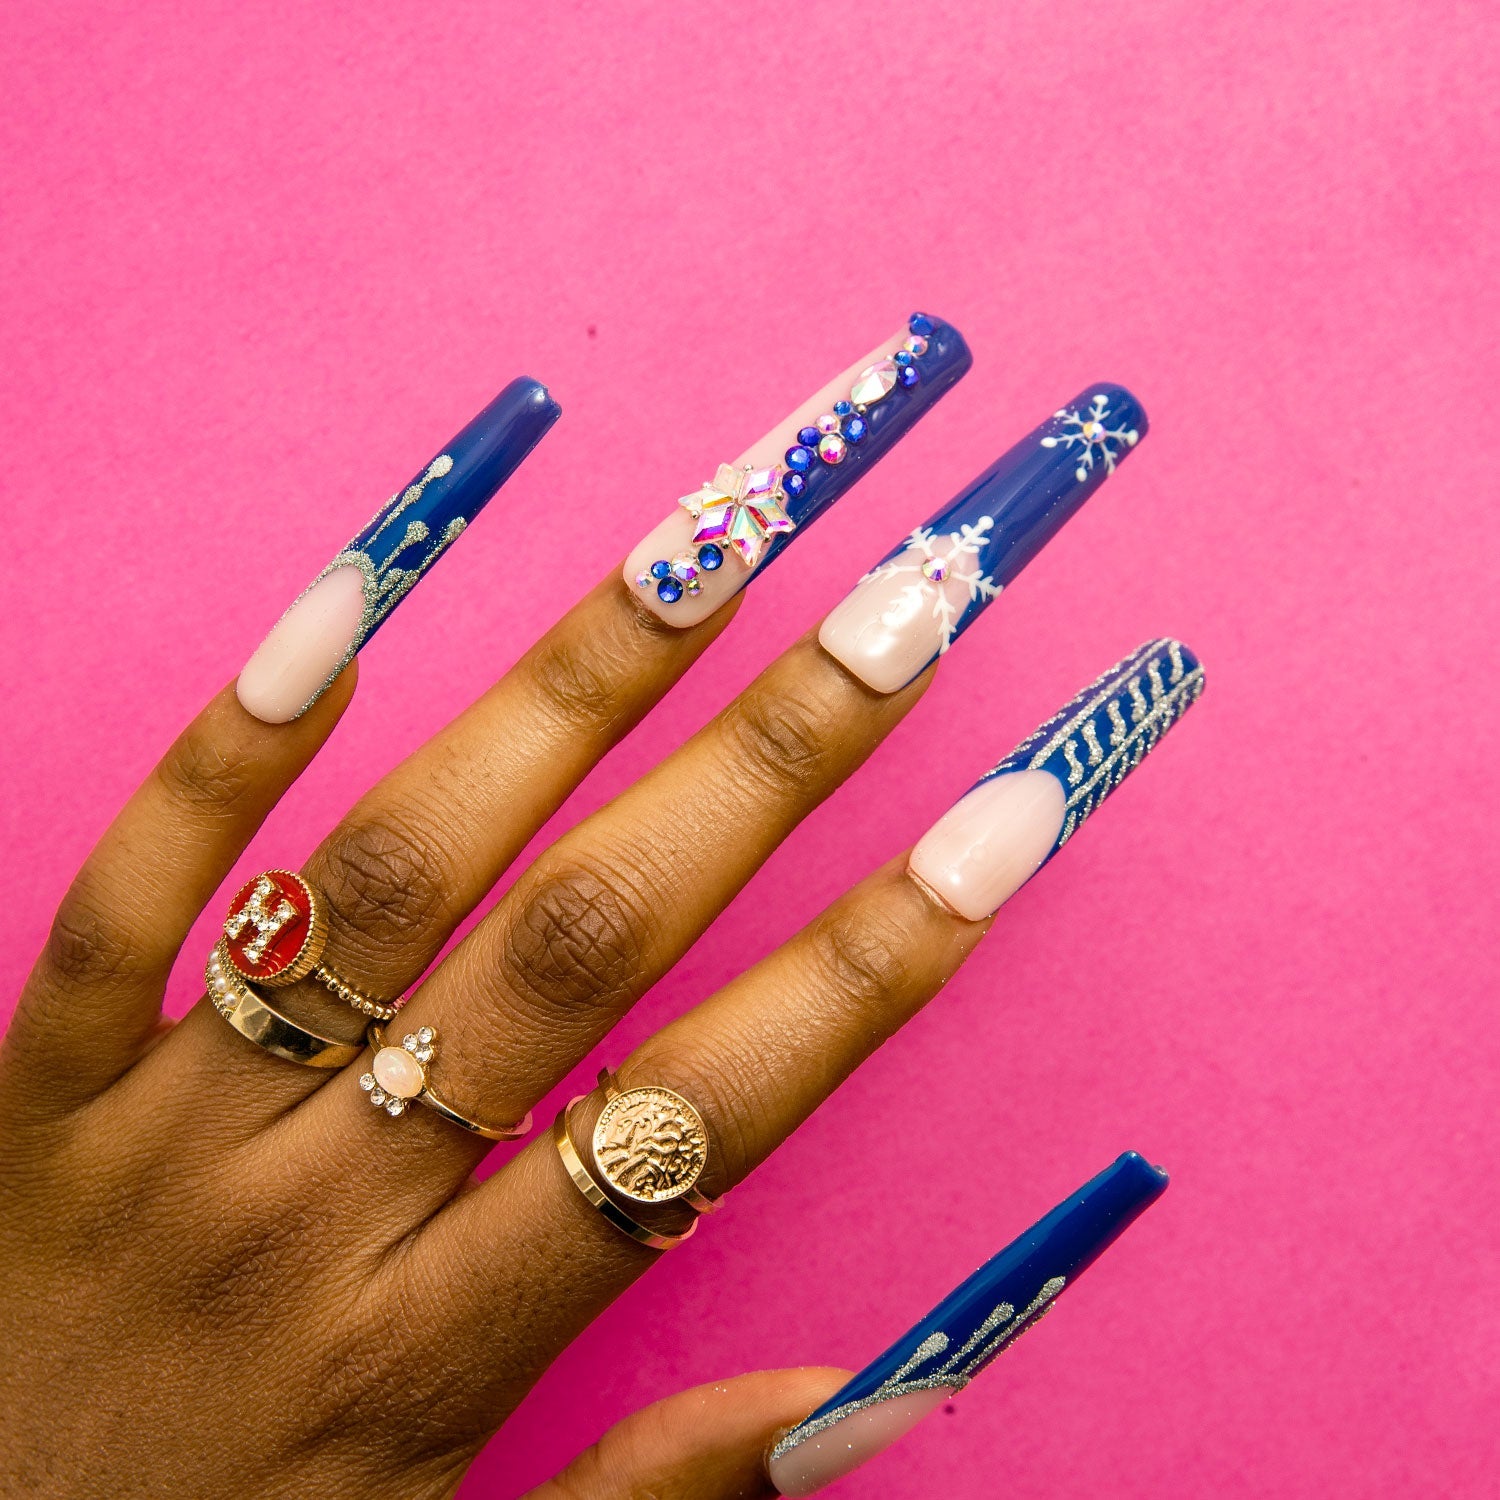 Hand with long square-shaped blue French tip press-on nails featuring winter-themed designs, including white snowflakes and jewelry-colored accents, against a pink background. The person is also wearing gold rings.